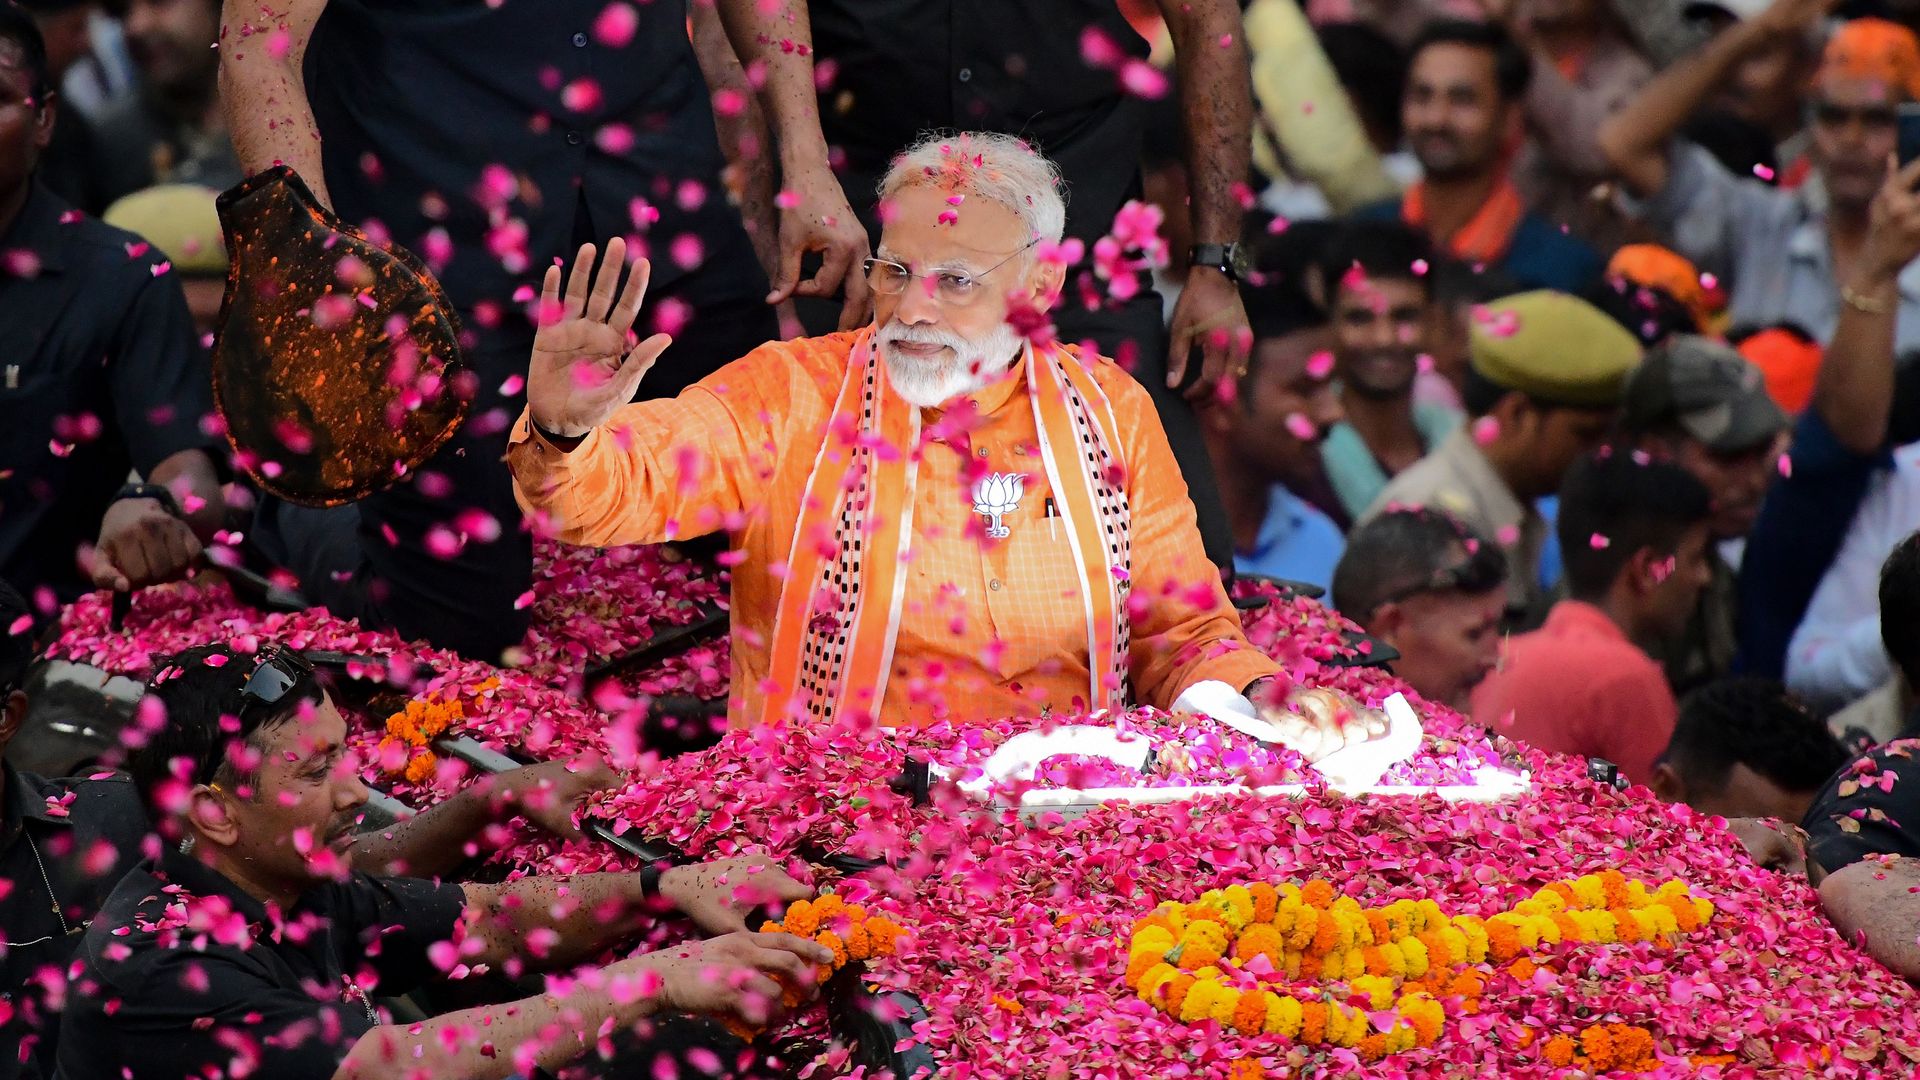   Indian Prime Minister and leader of the Bharatiya Janata Party (BJP) Narendra Modi gestures during a roadshow in Varanasi on April 25, 2019.